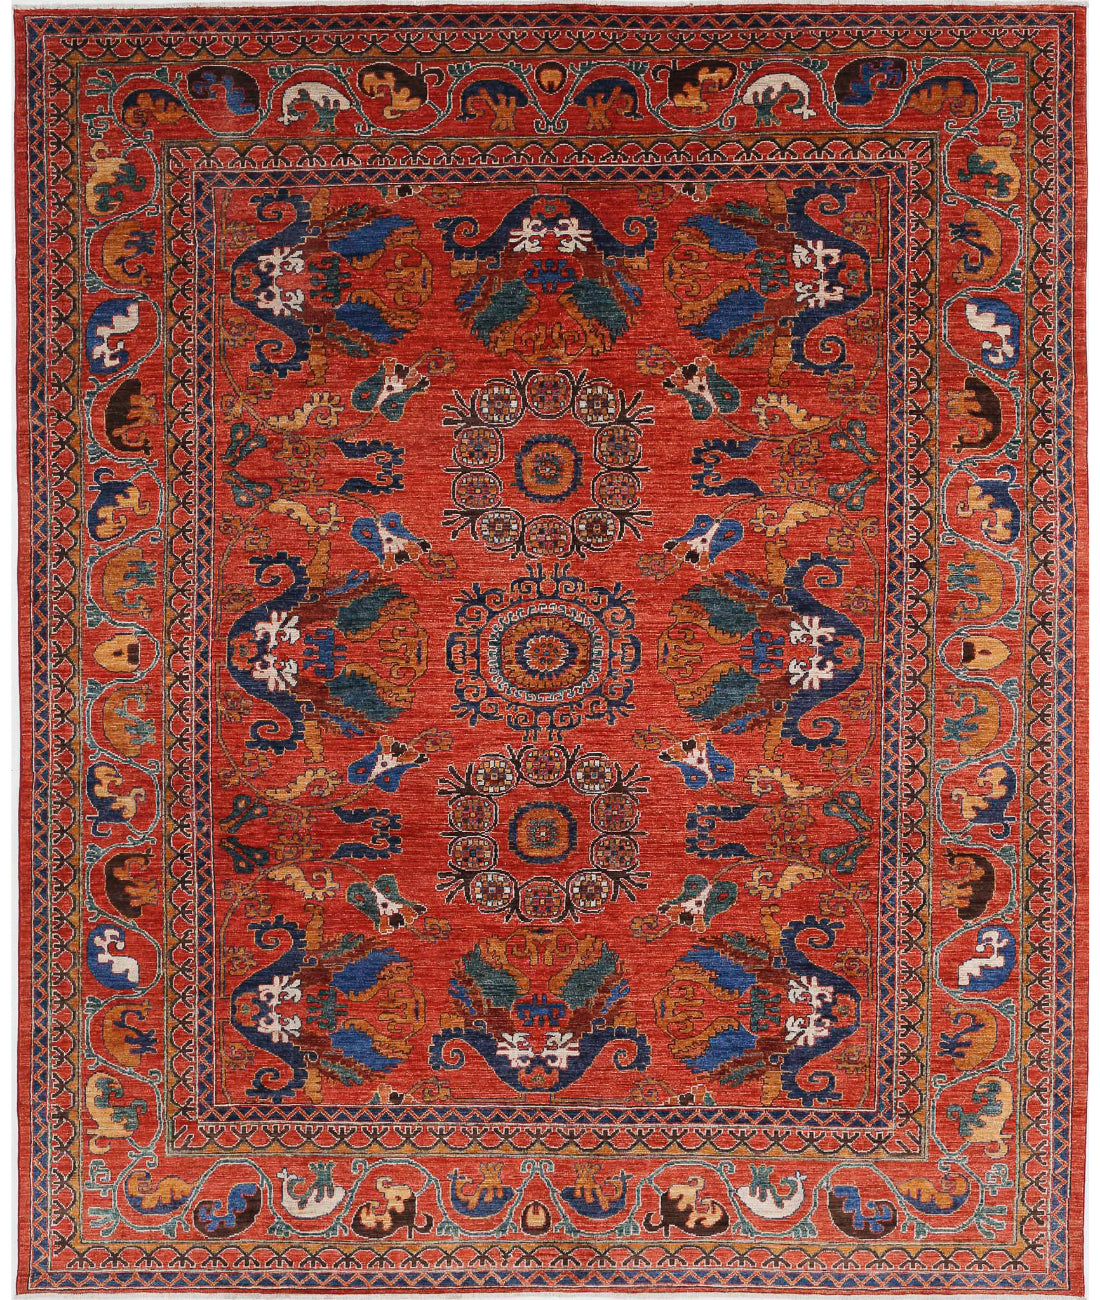 Hand Knotted Nomadic Caucasian Humna Wool Rug - 8'4'' x 9'11'' 8'4'' x 9'11'' (250 X 298) / Red / Red